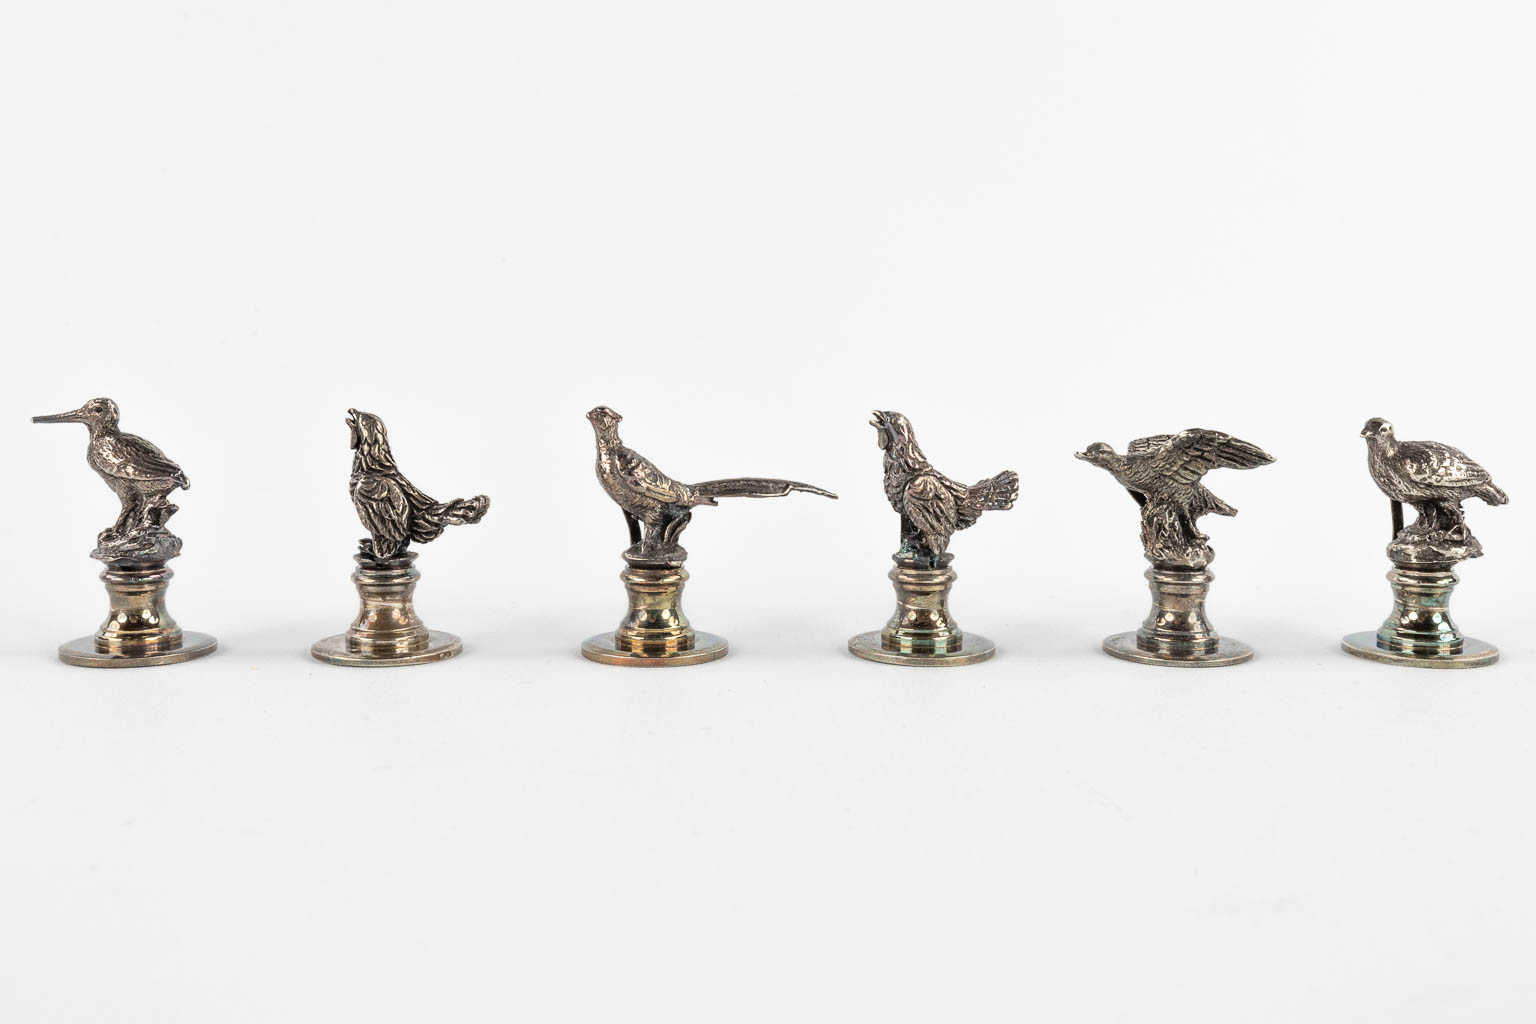 12 figurative animal place or menu card holders, silver-plated bronze. (H:5 cm)